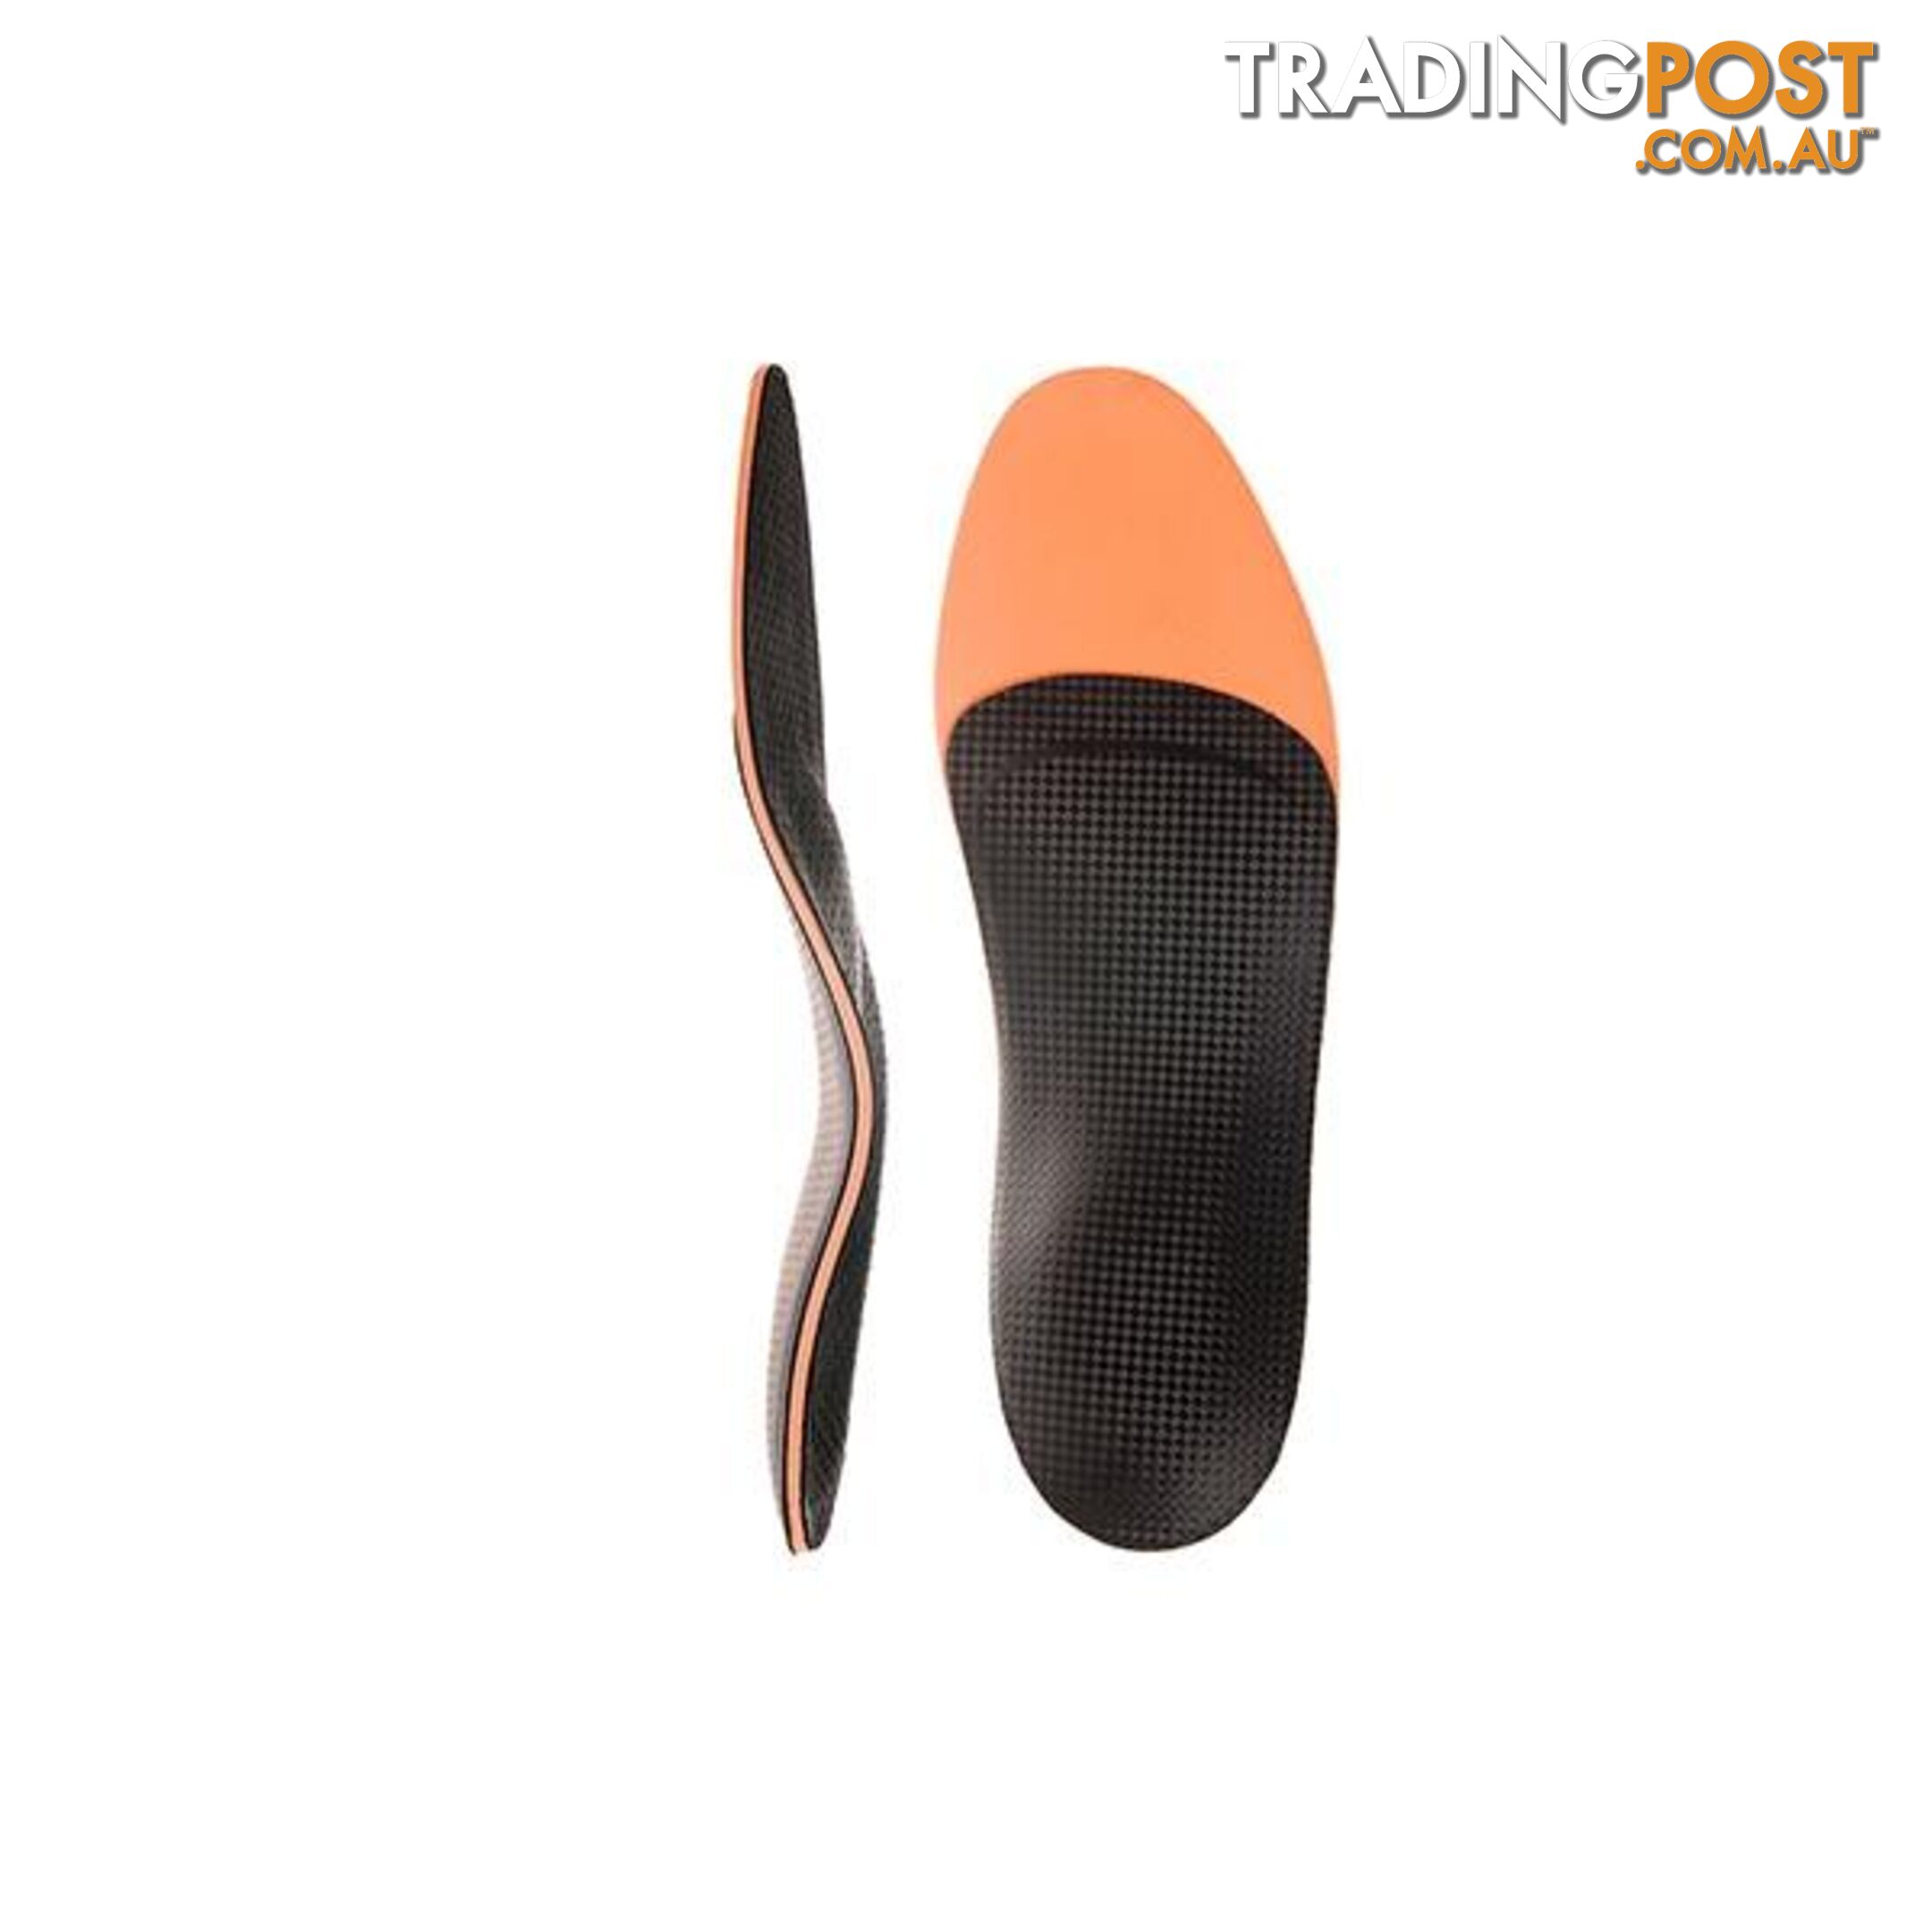 Signature Executive Dress Shoe Leather Insoles - Leather Insoles - 7427046218542